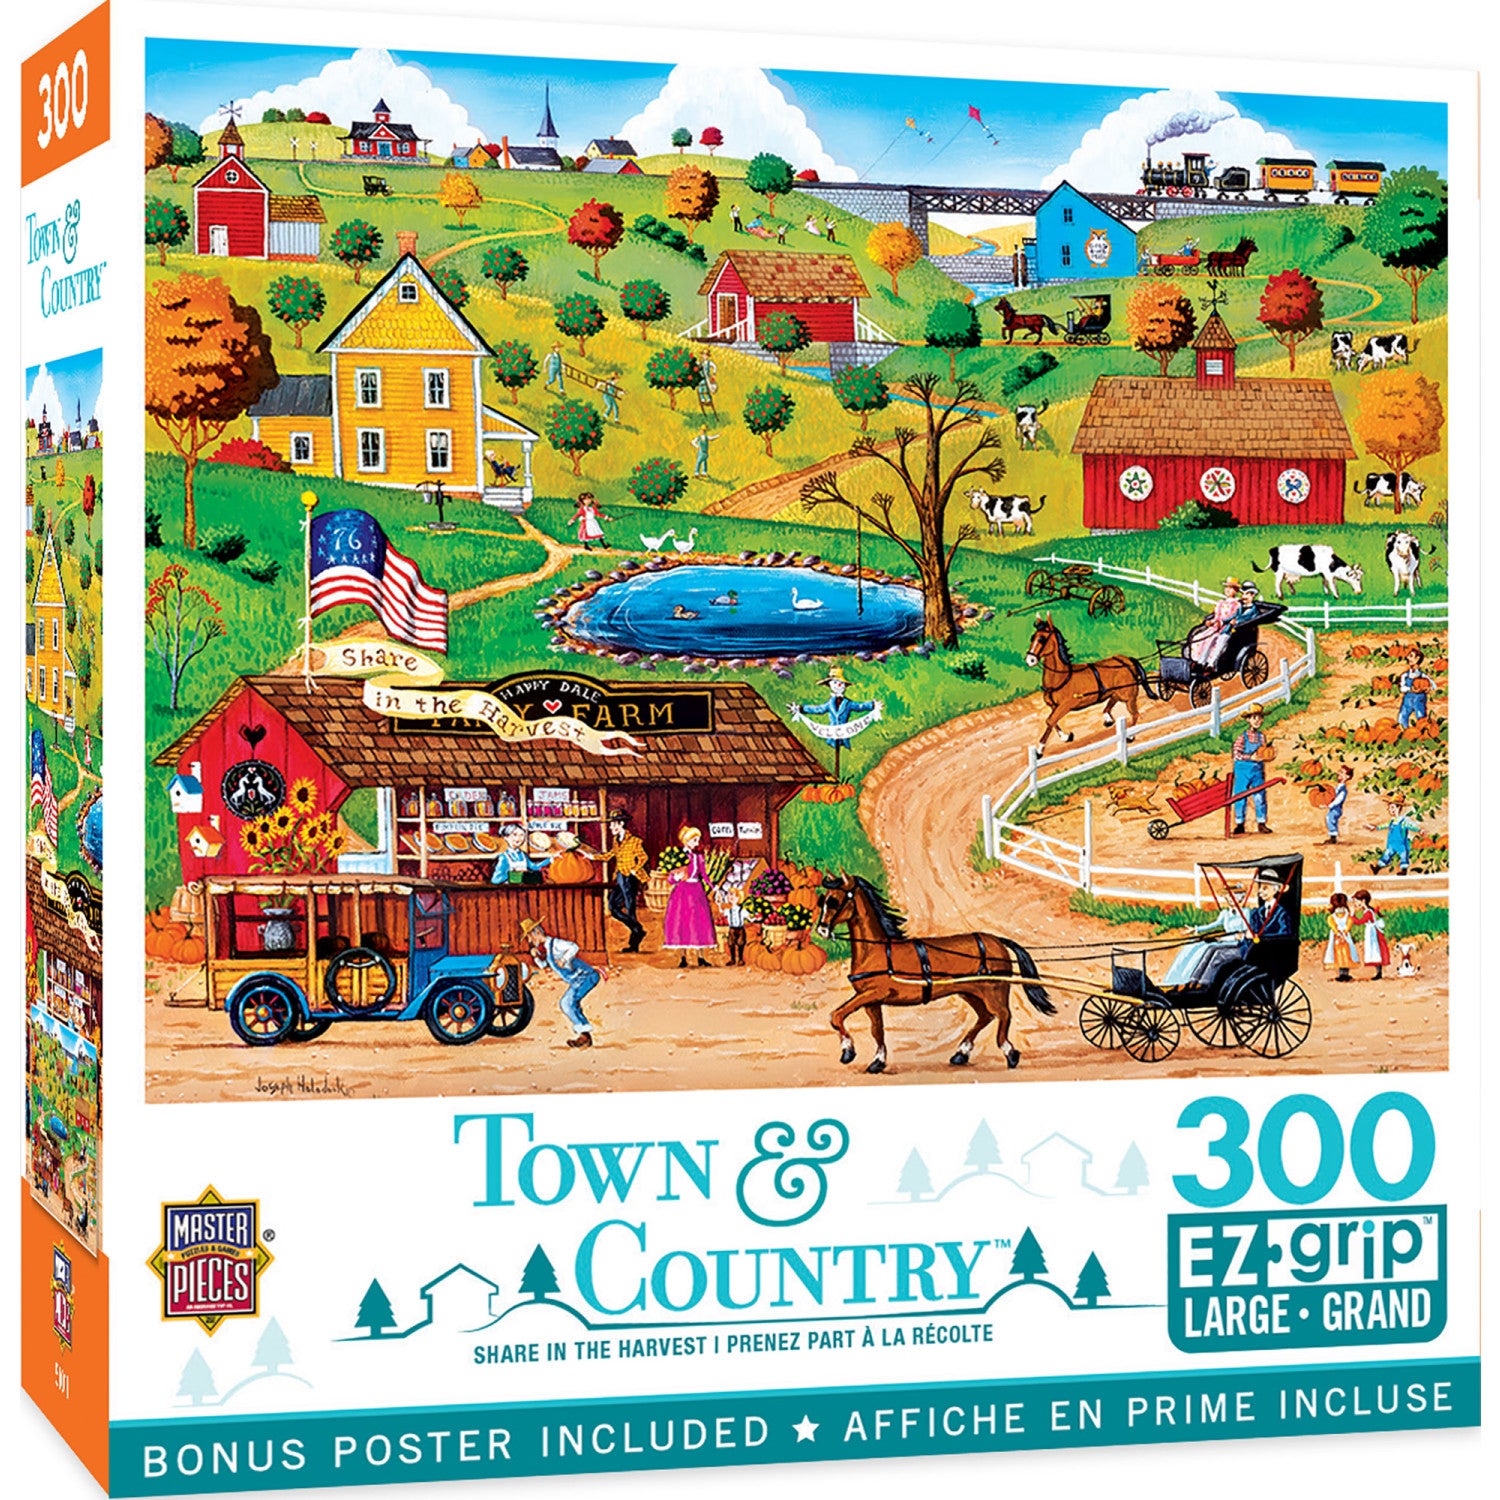 Town & Country - Share in the Harvest 300 Piece EZ Grip Jigsaw Puzzle